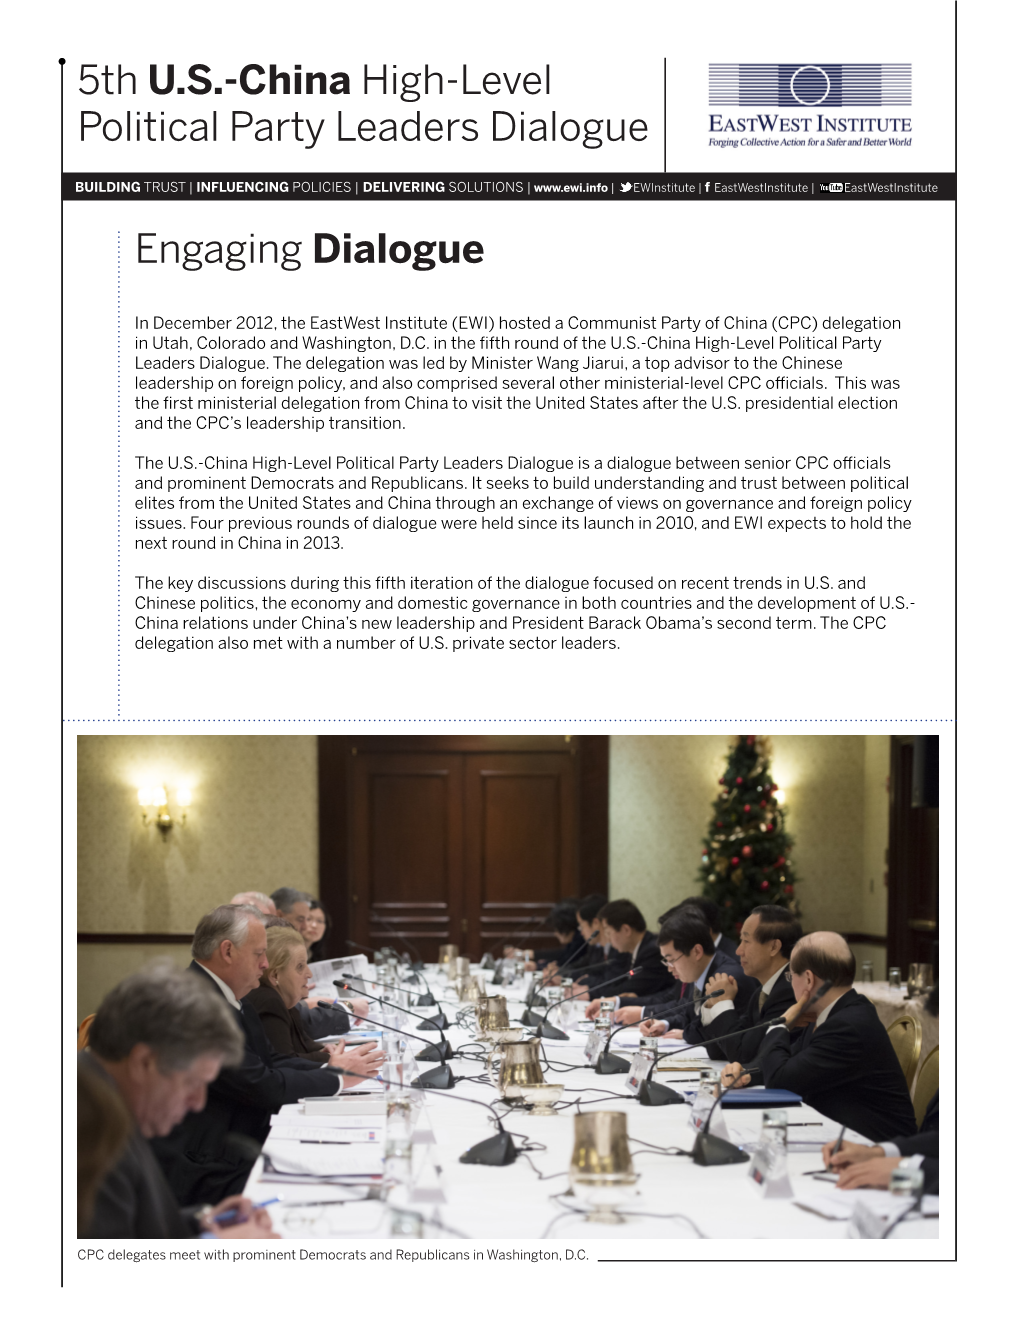 Engaging Dialogue 5Th U.S.-China High-Level Political Party Leaders